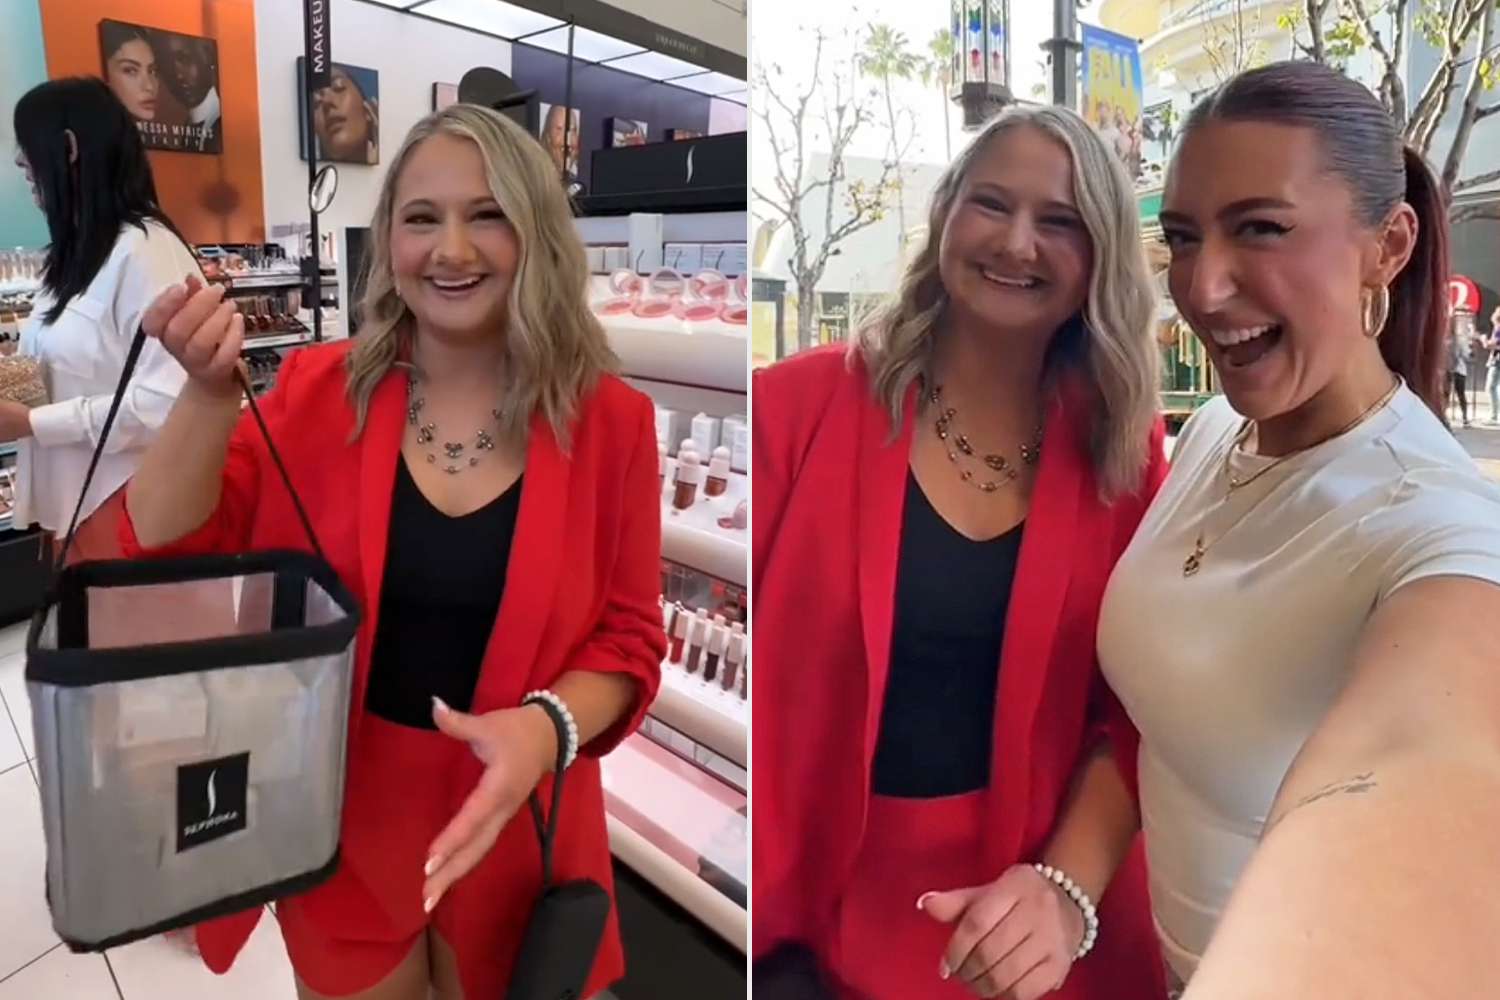 Gypsy-Rose Blanchard Takes Her First Trip to Sephora: Watch [Video]